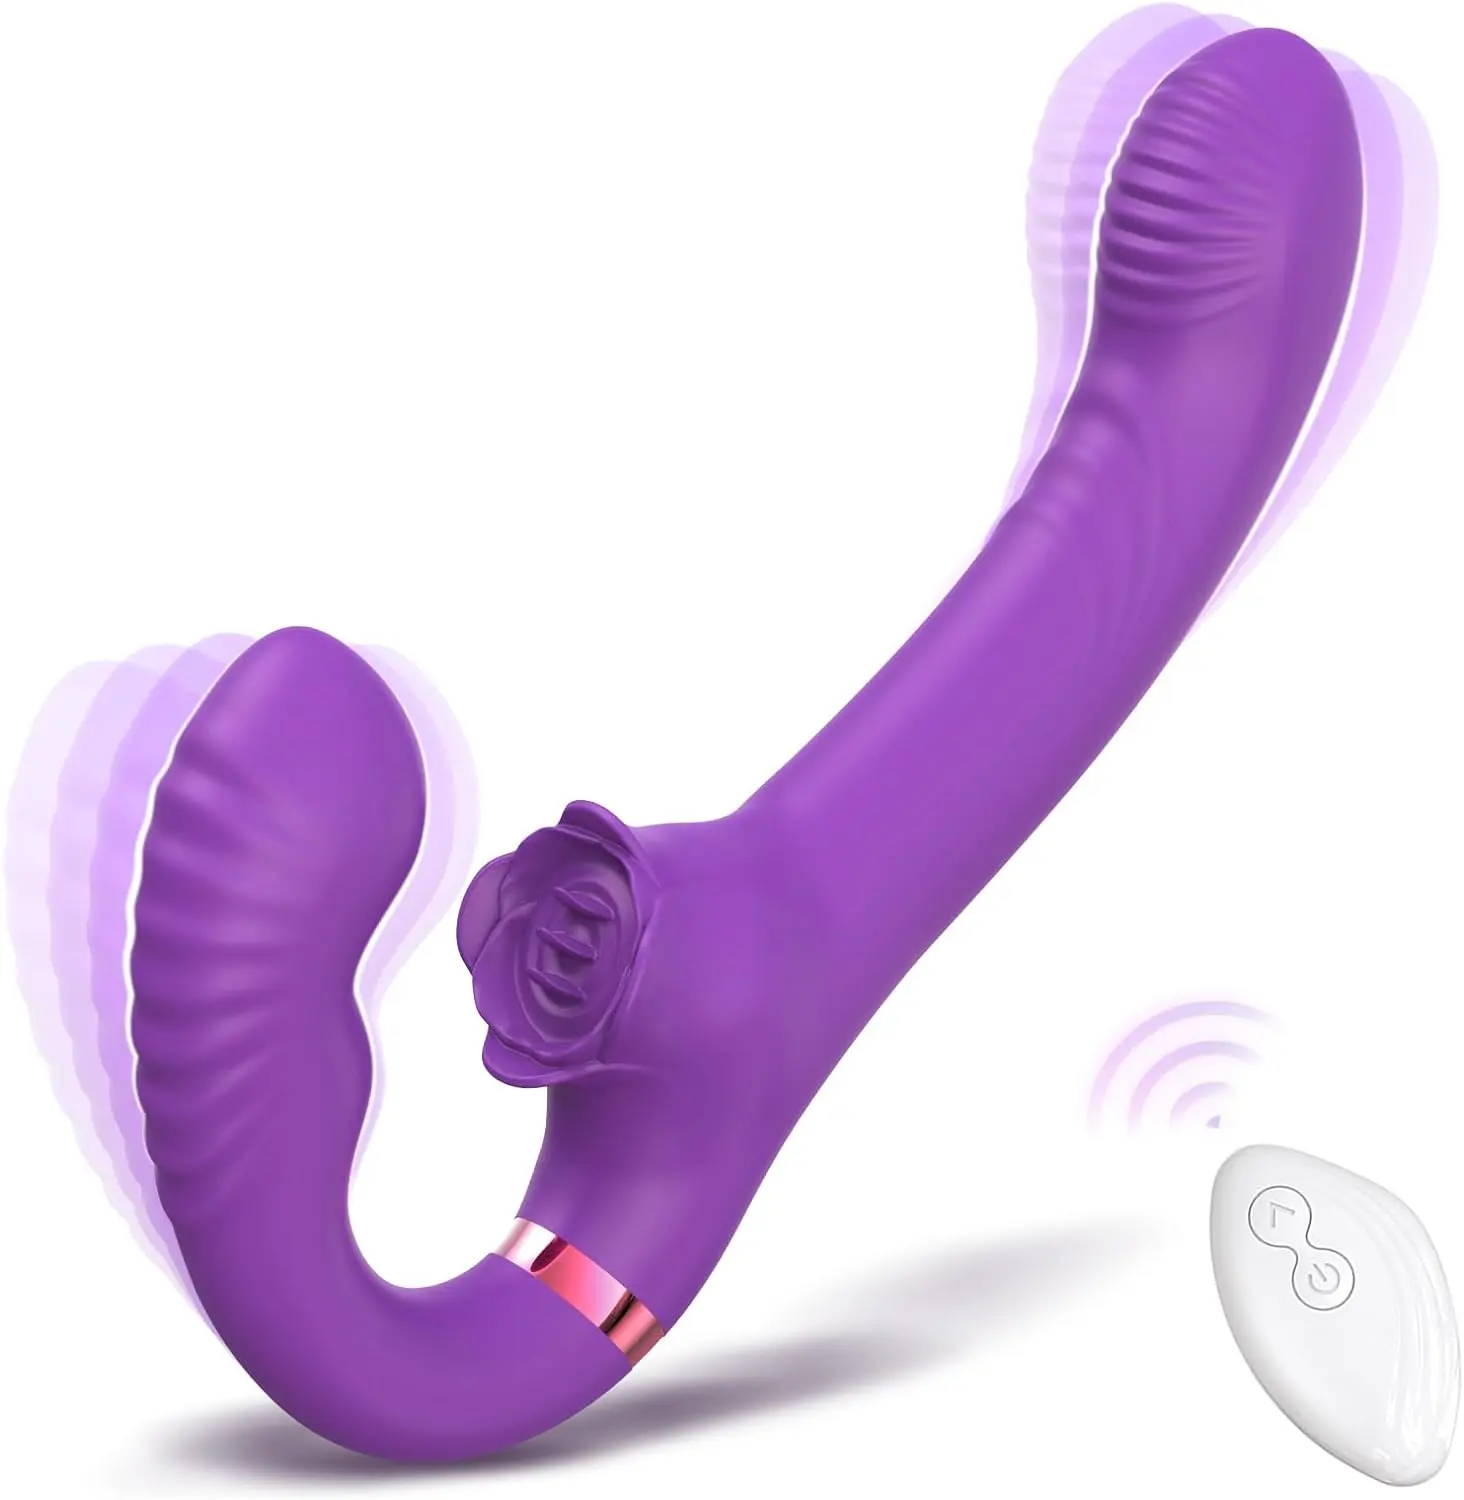 Wireless Remote Control Silicone Double-Headed Female G-Spot Vibrator Adult Sex Toy for Lesbian Use